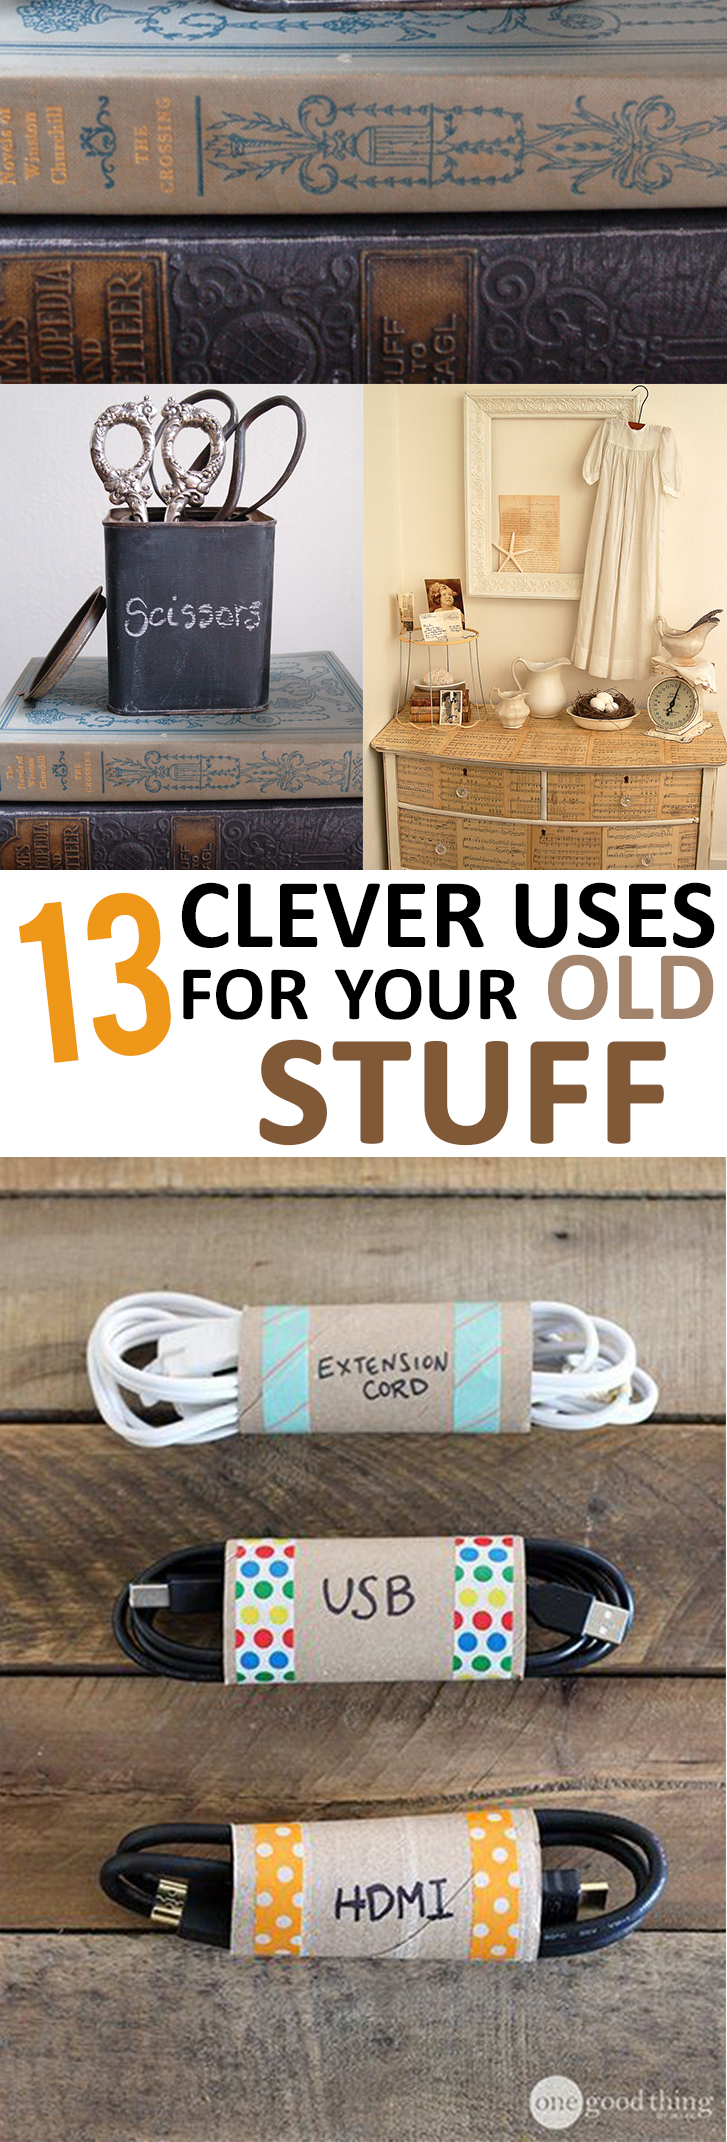 13 Clever Uses for Your Old Stuff